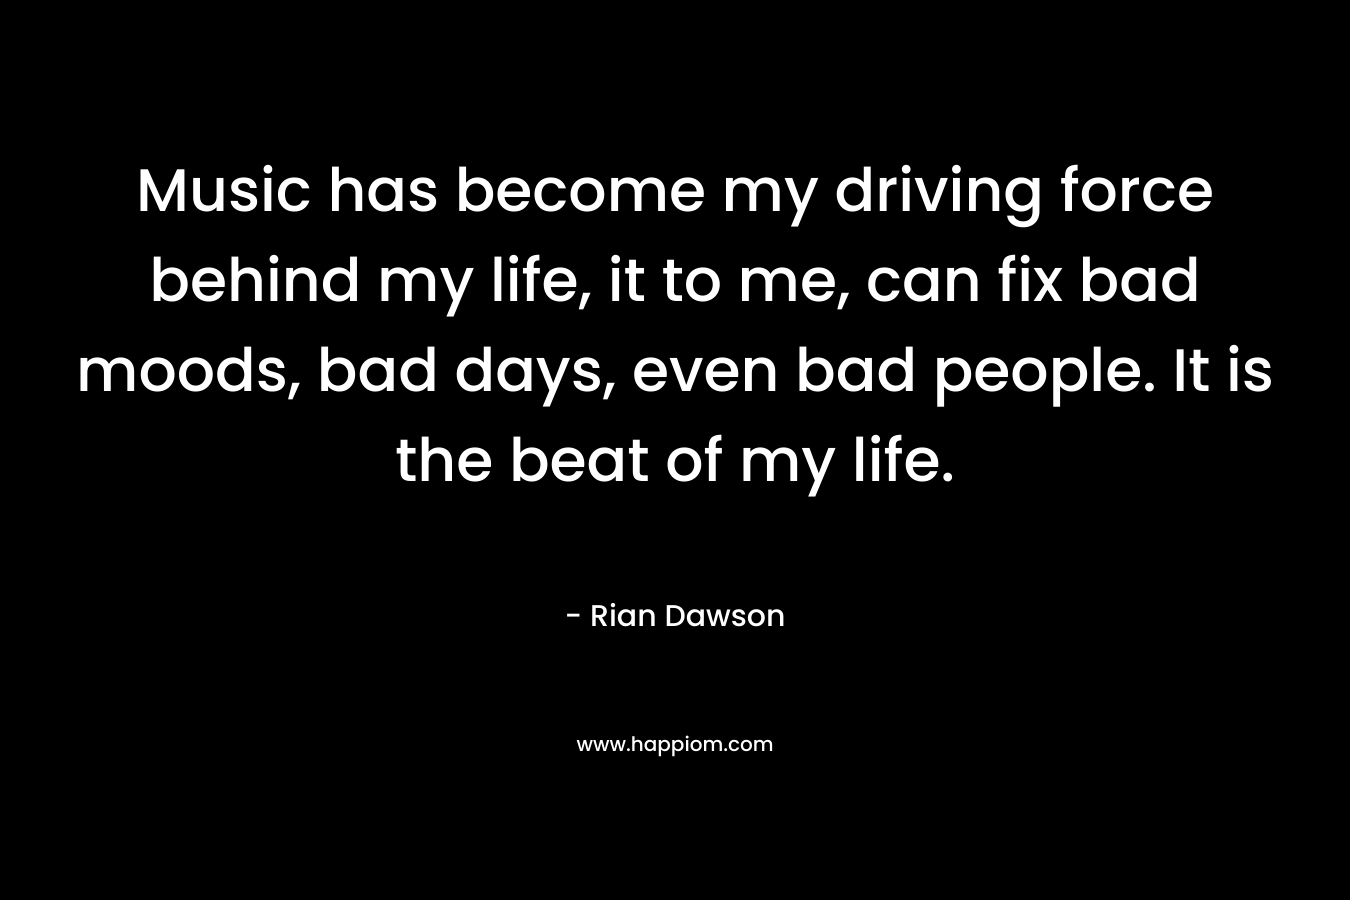 Music has become my driving force behind my life, it to me, can fix bad moods, bad days, even bad people. It is the beat of my life.